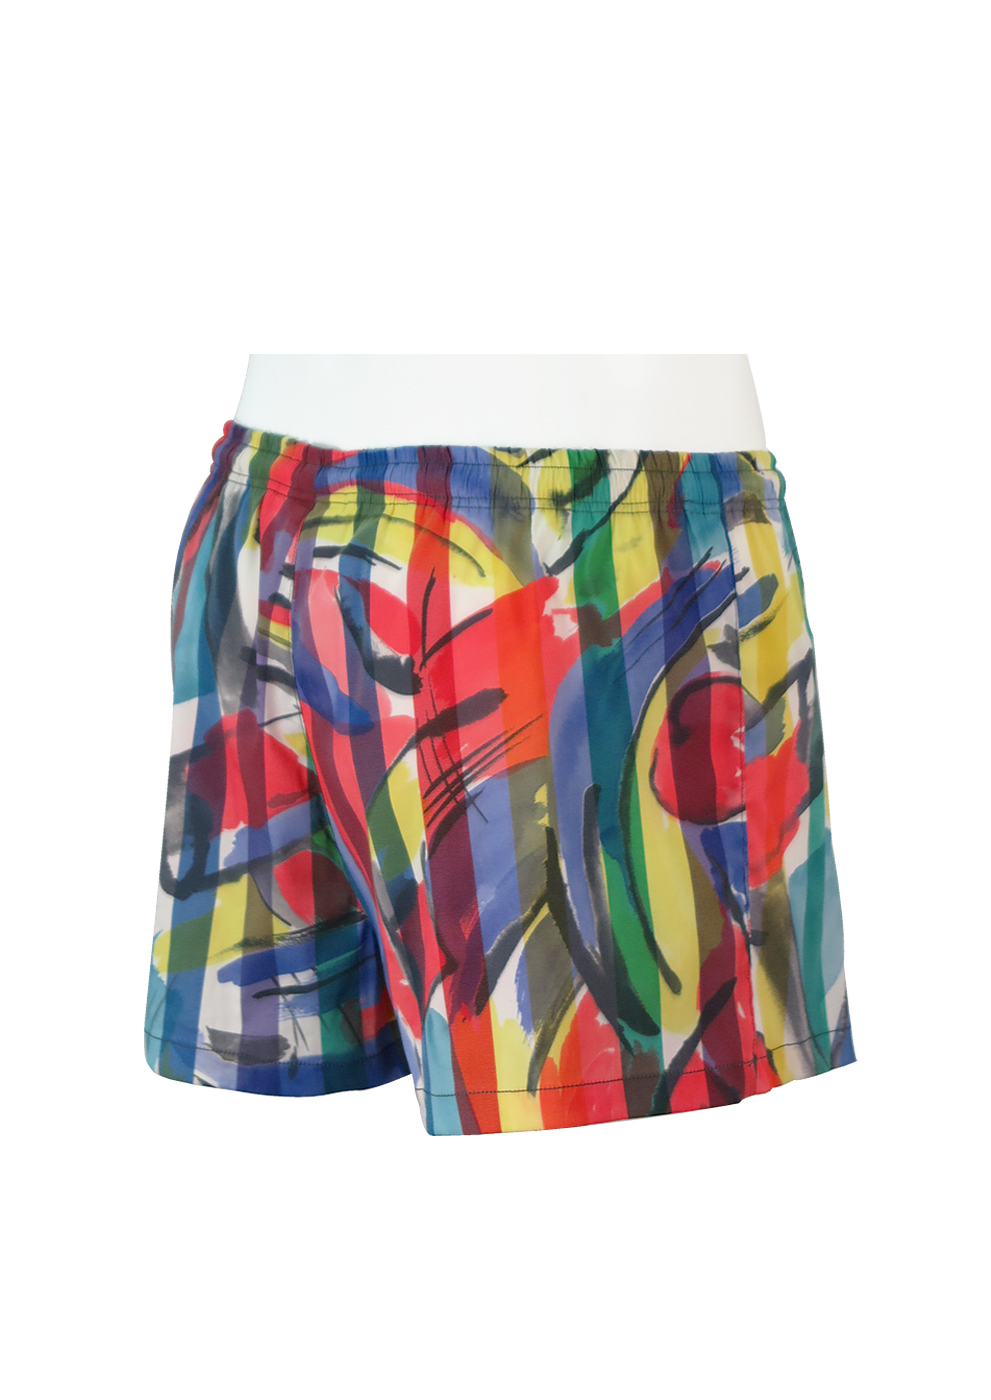 Belfe & Belfe Swim Shorts with a Multicoloured Striped Painterly ...